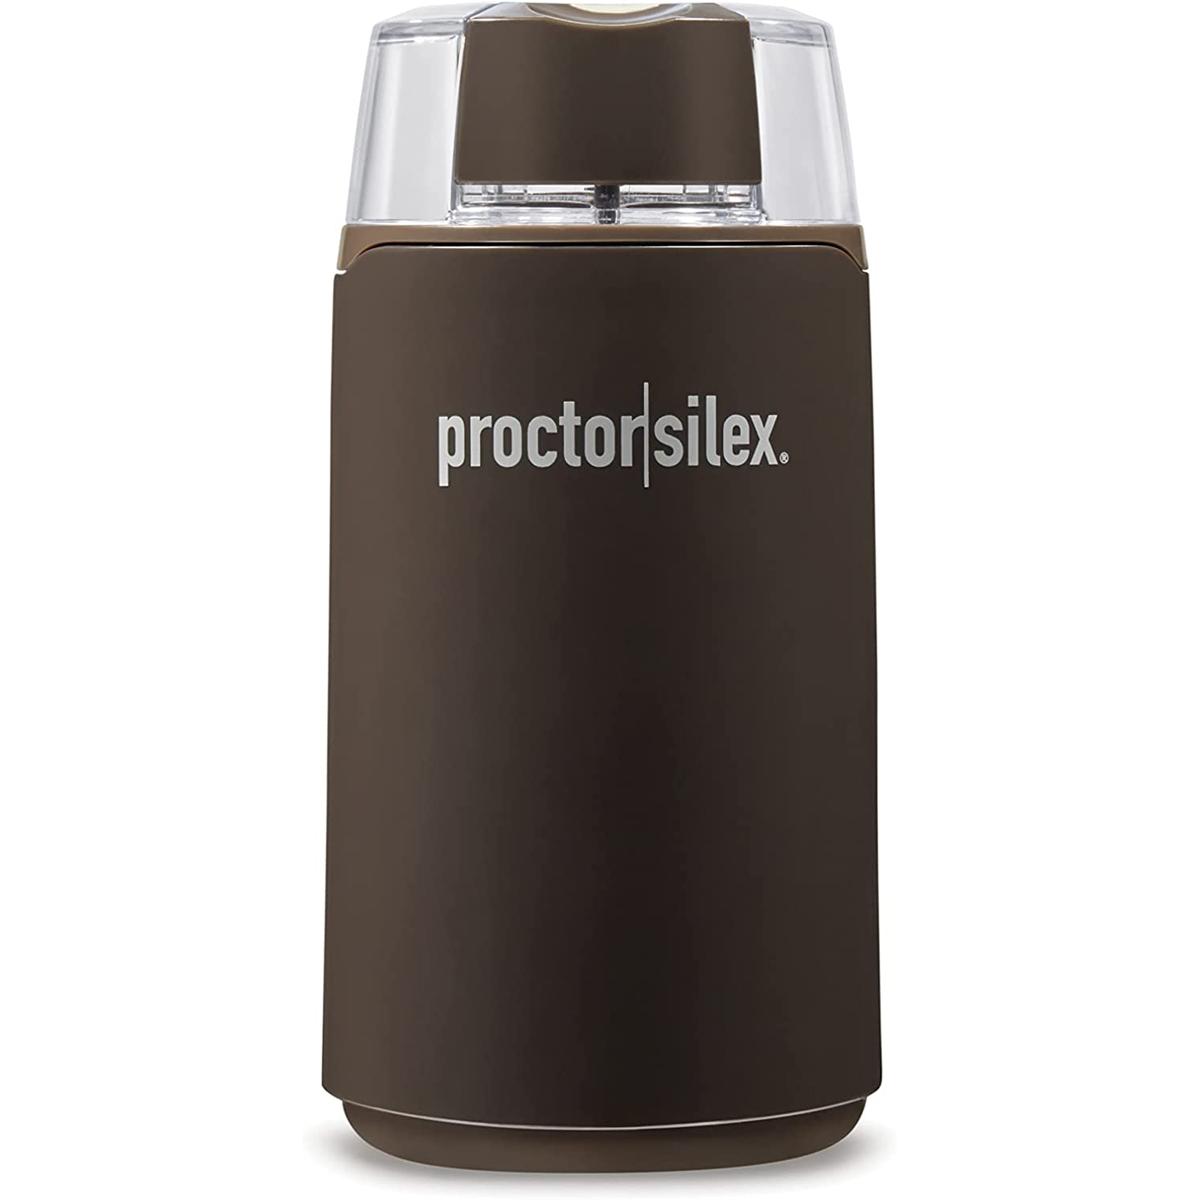 Proctor-Silex Electric Coffee Grinder for $9.99